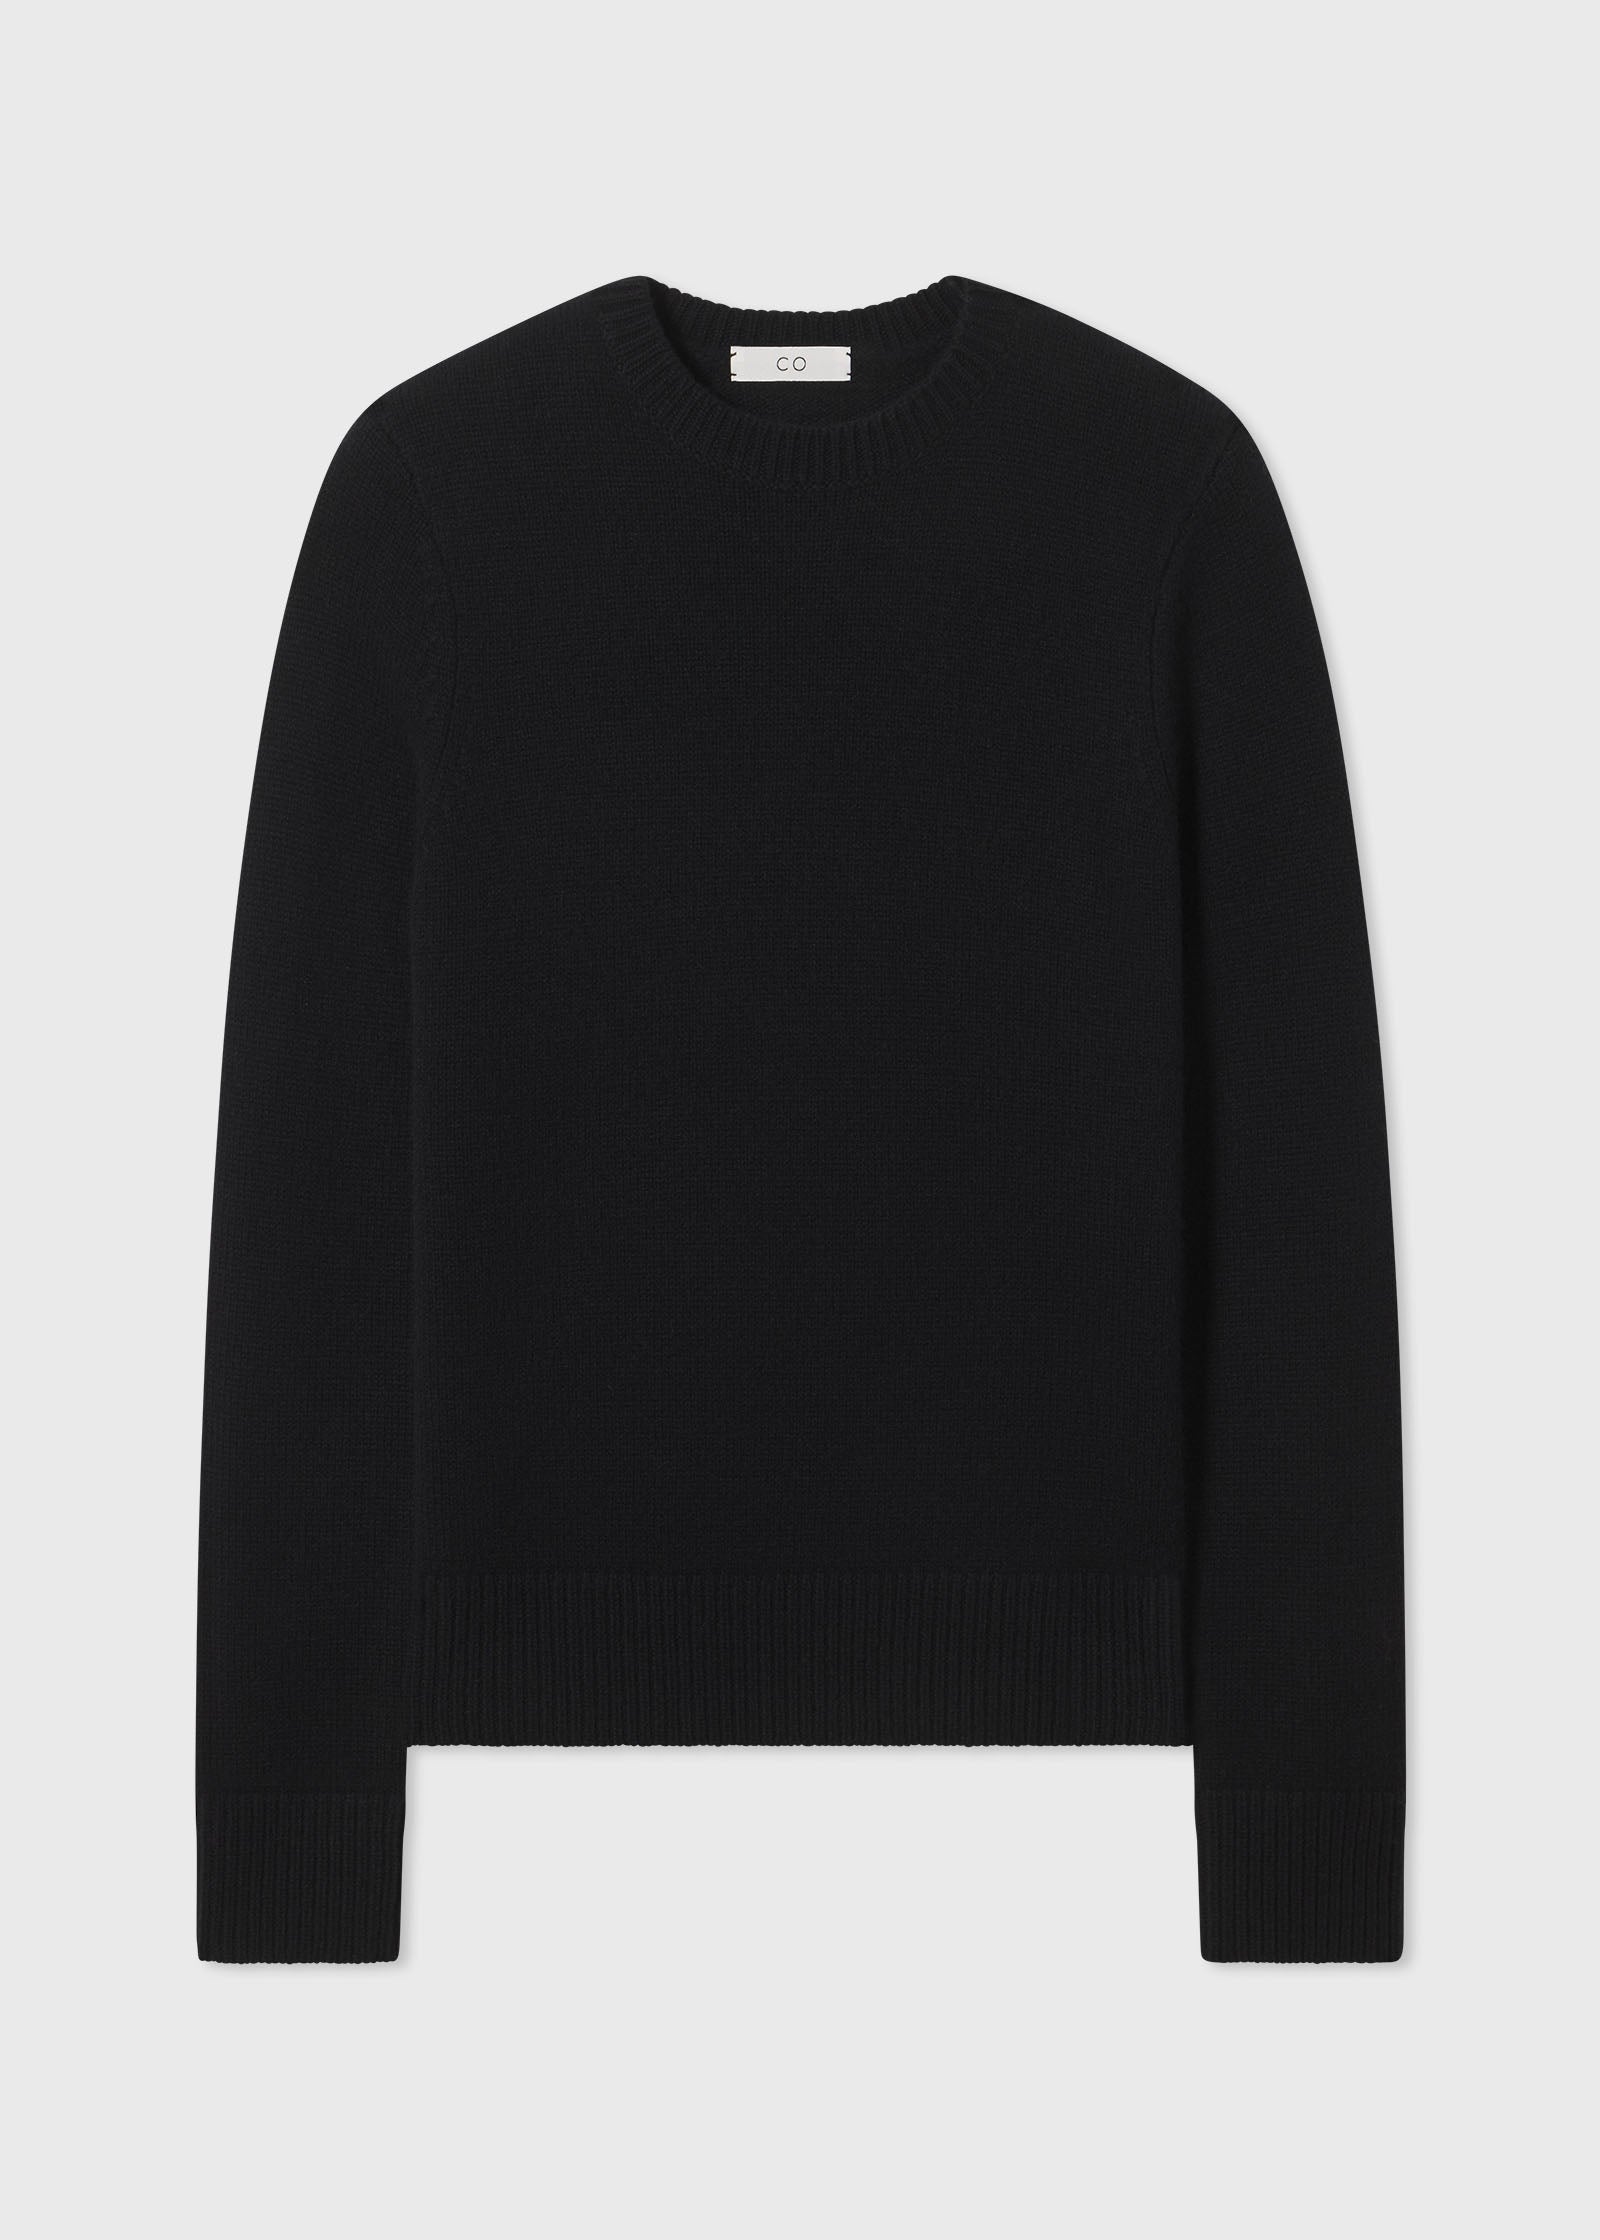 Classic Crew Neck in Cashmere - Black - CO Collections